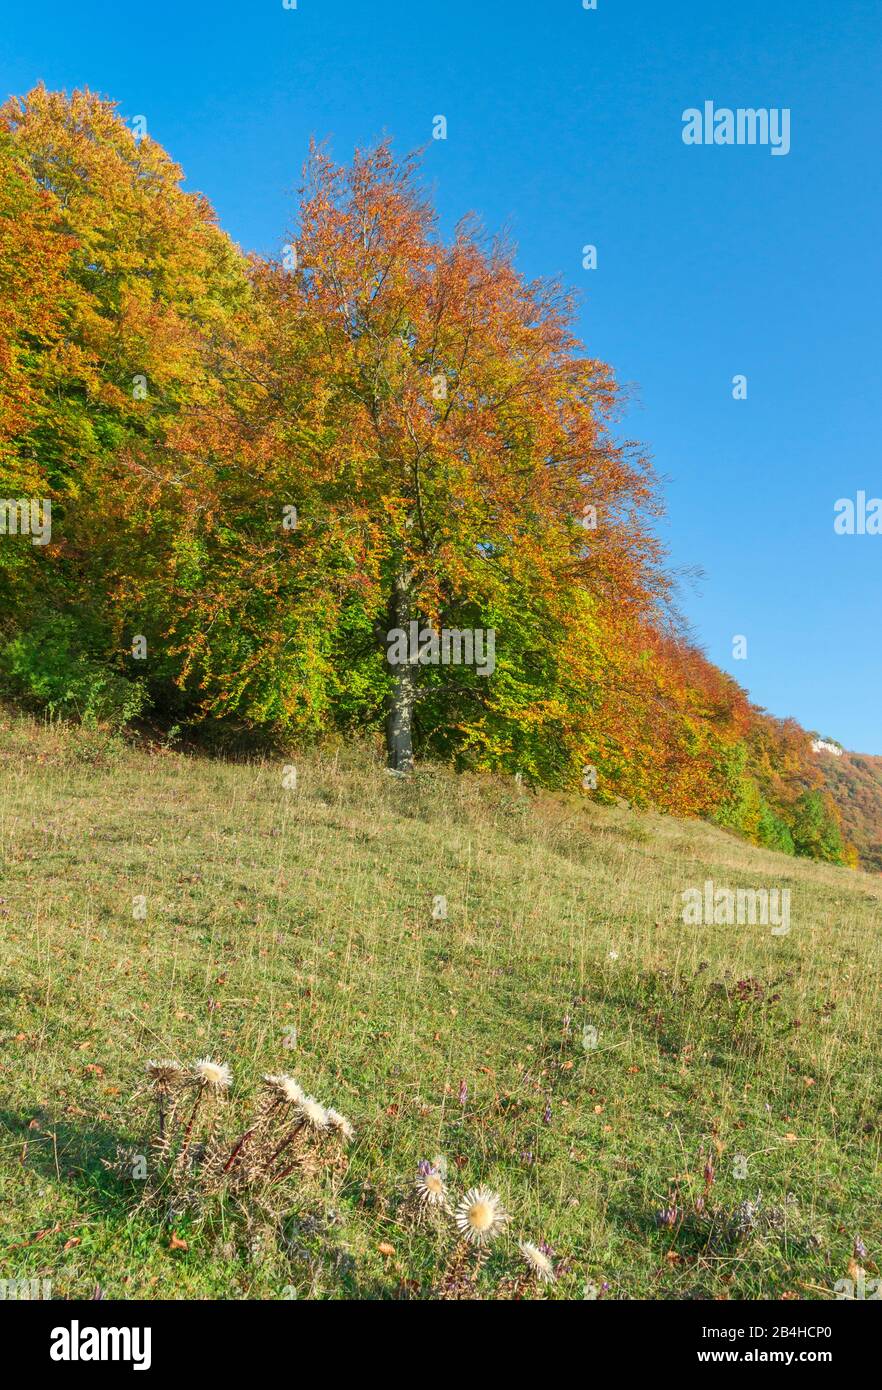 Germany, Baden-Wuerttemberg, Neuffen, red beech with colorful autumn leaves on the Neuffener Steige. Stock Photo